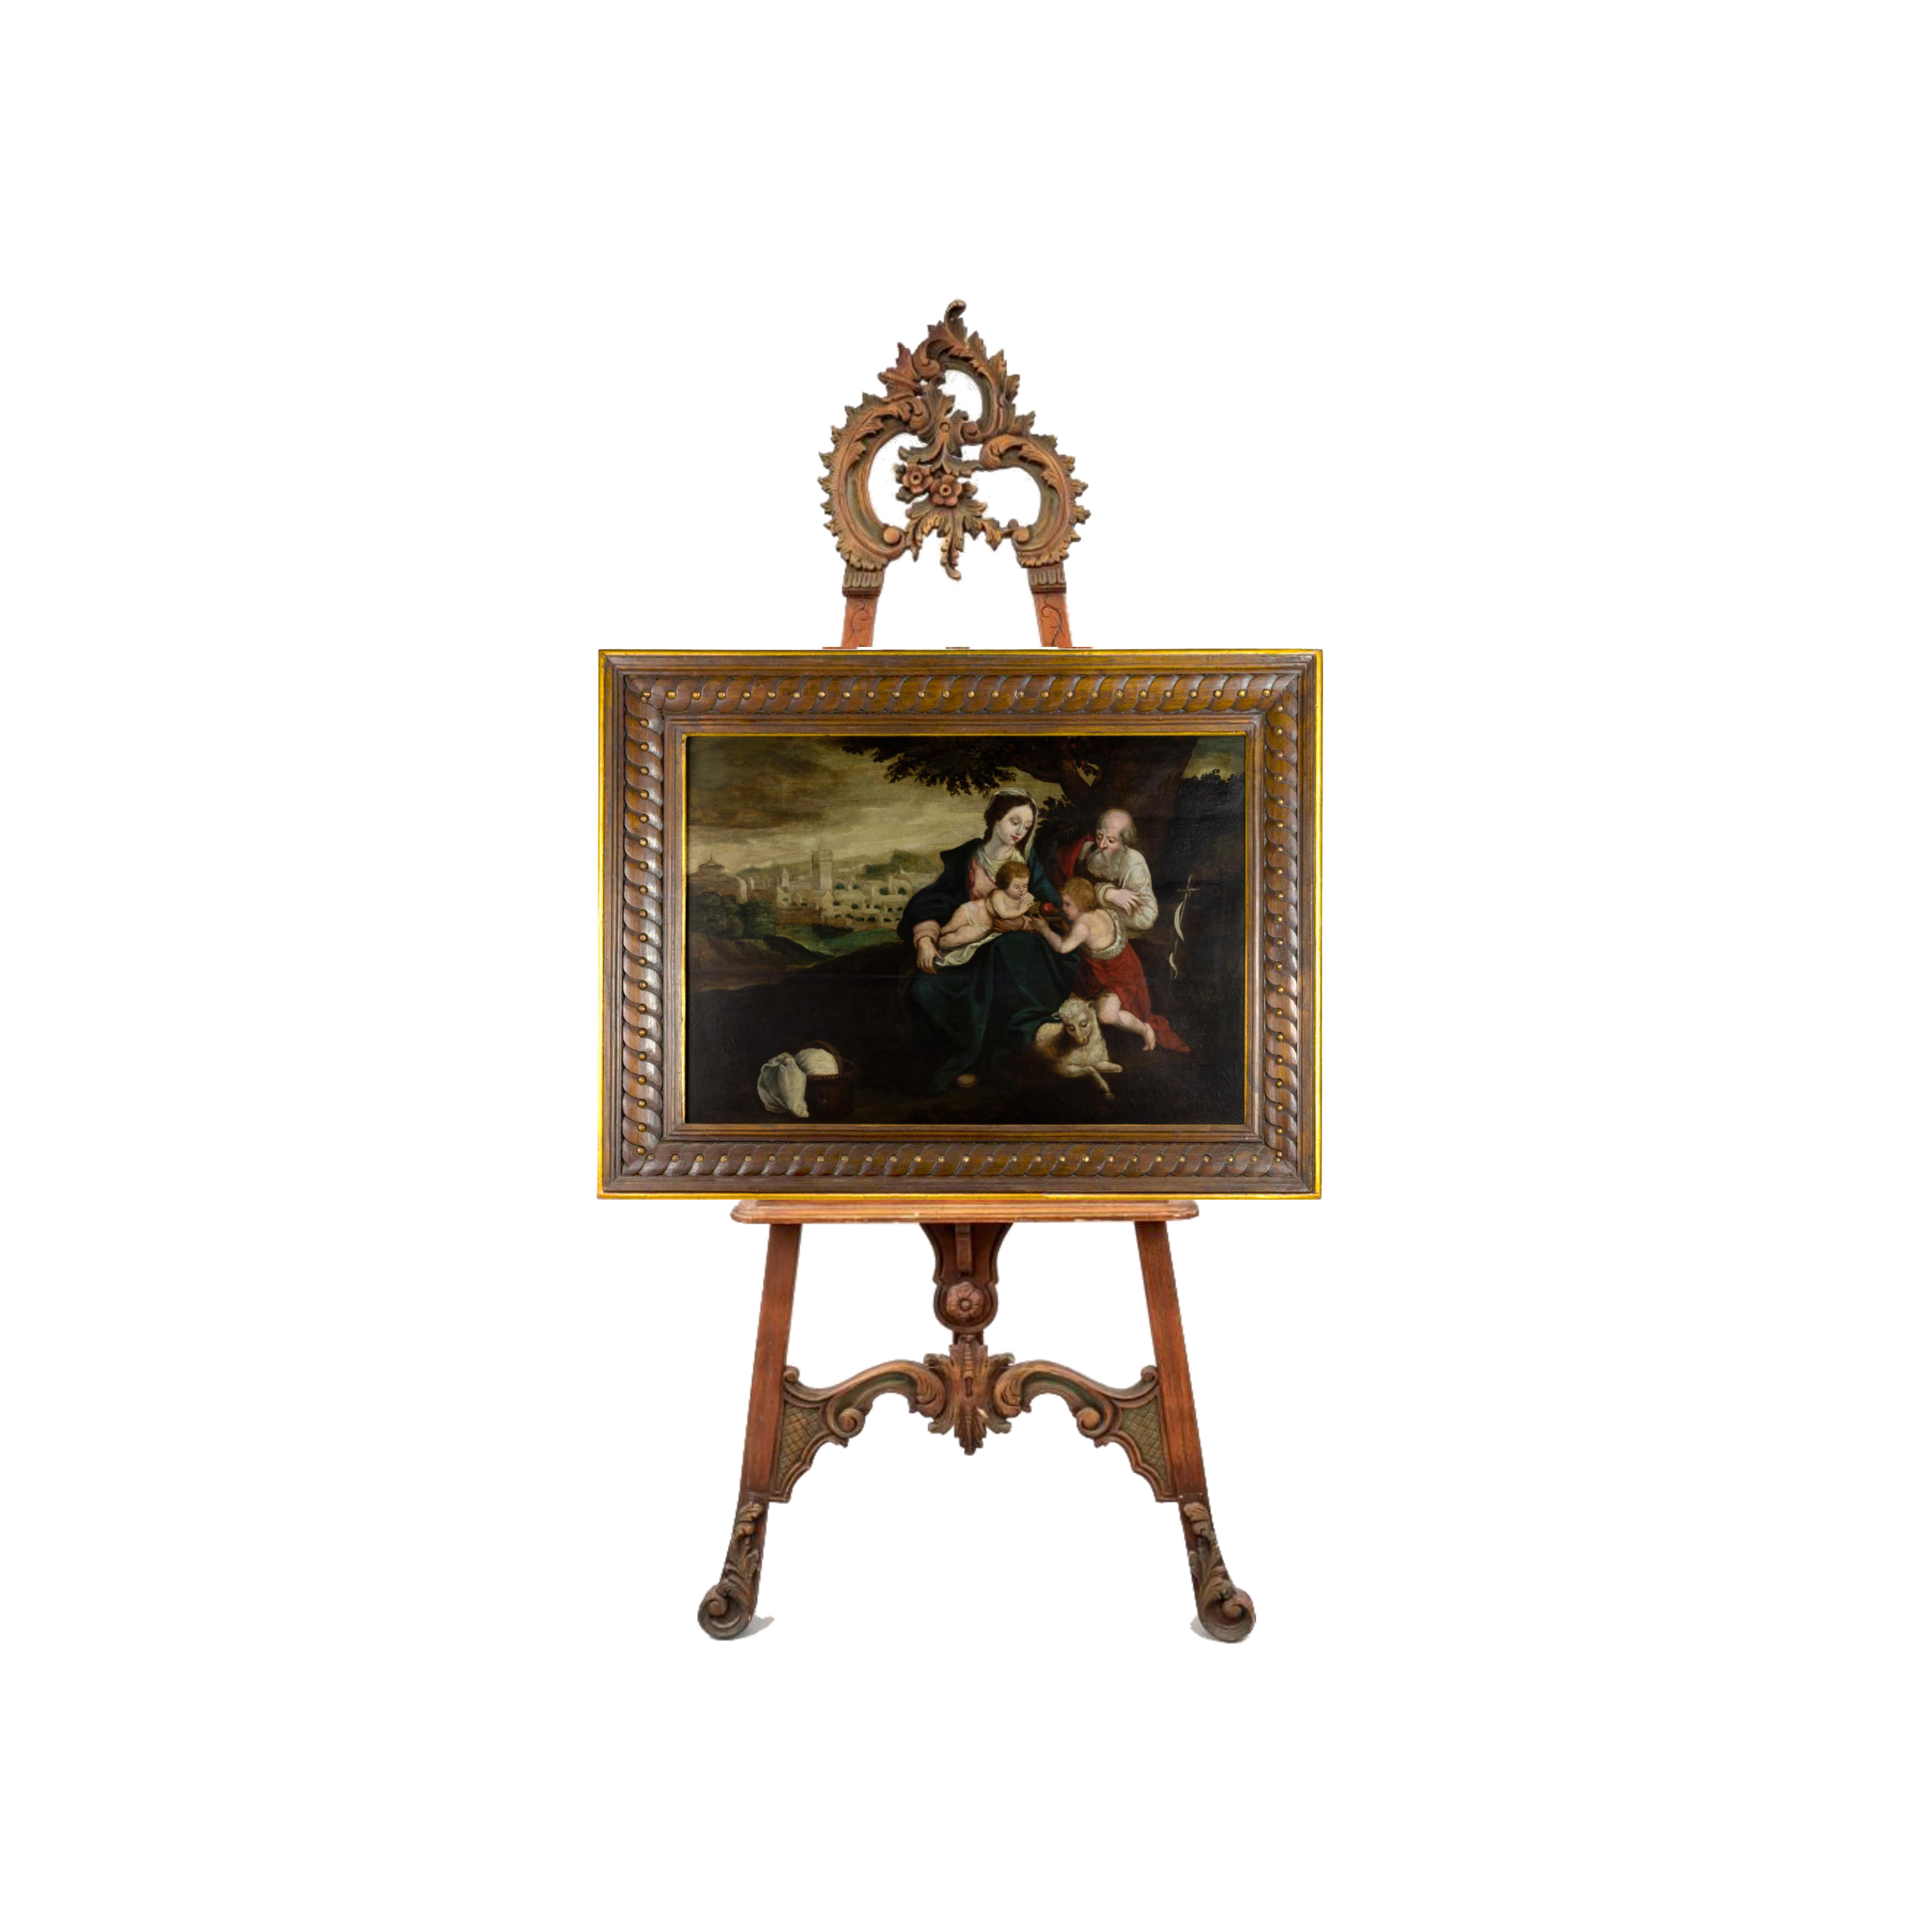 Renaissance The Holy Family And Saint John The Baptist Painting 17th Century Religious Art For Sale